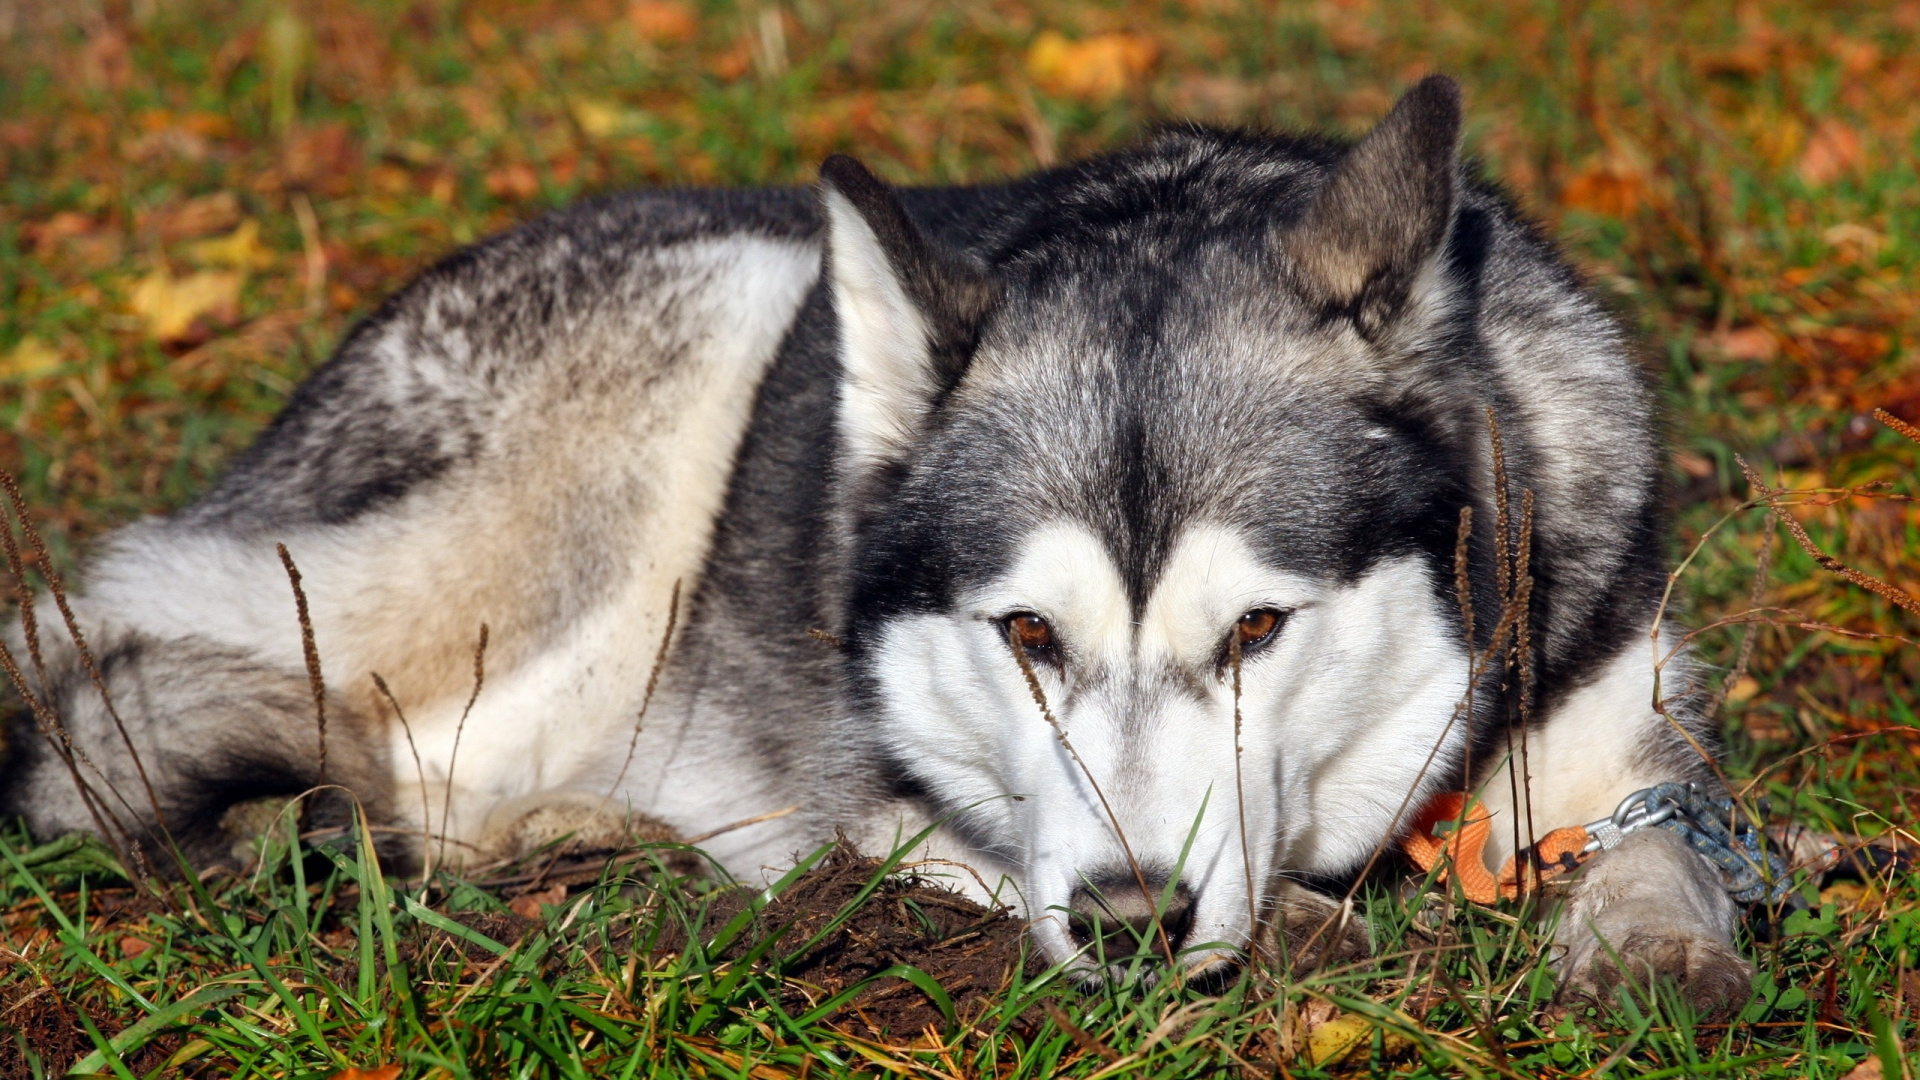 White and Black Siberian Husky Lying on Ground. Wallpaper in 1920x1080 Resolution